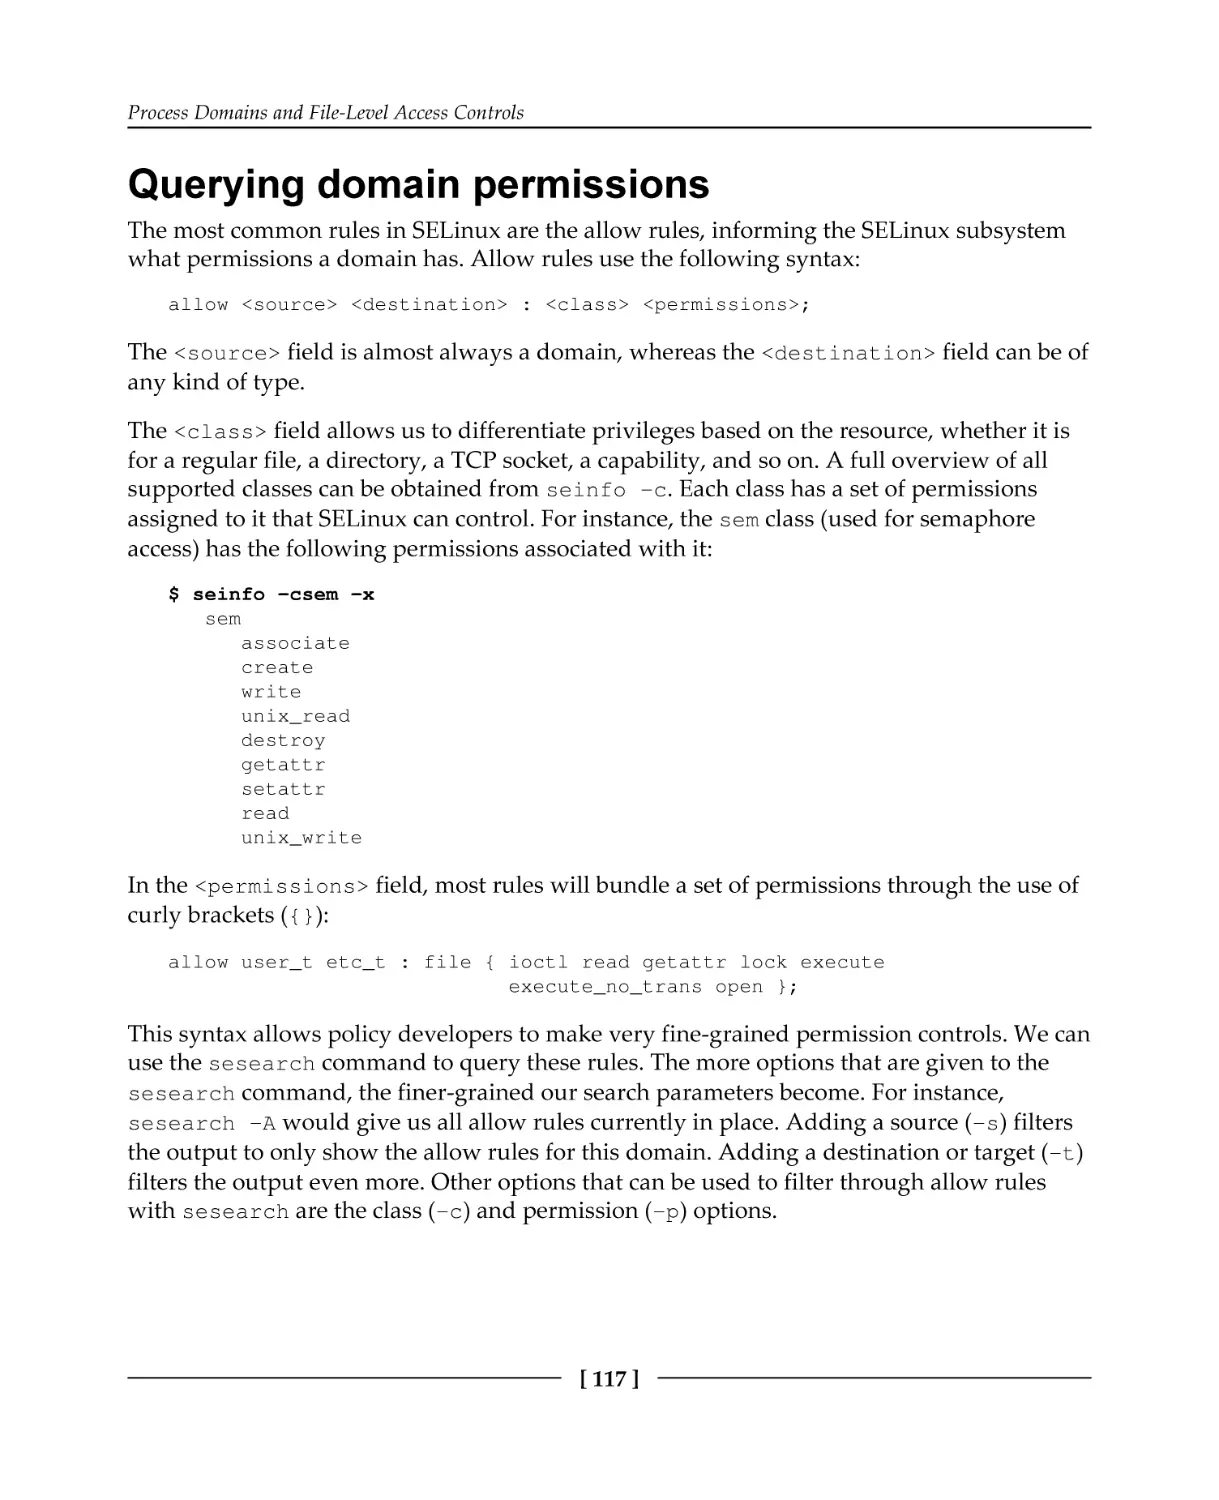 Querying domain permissions